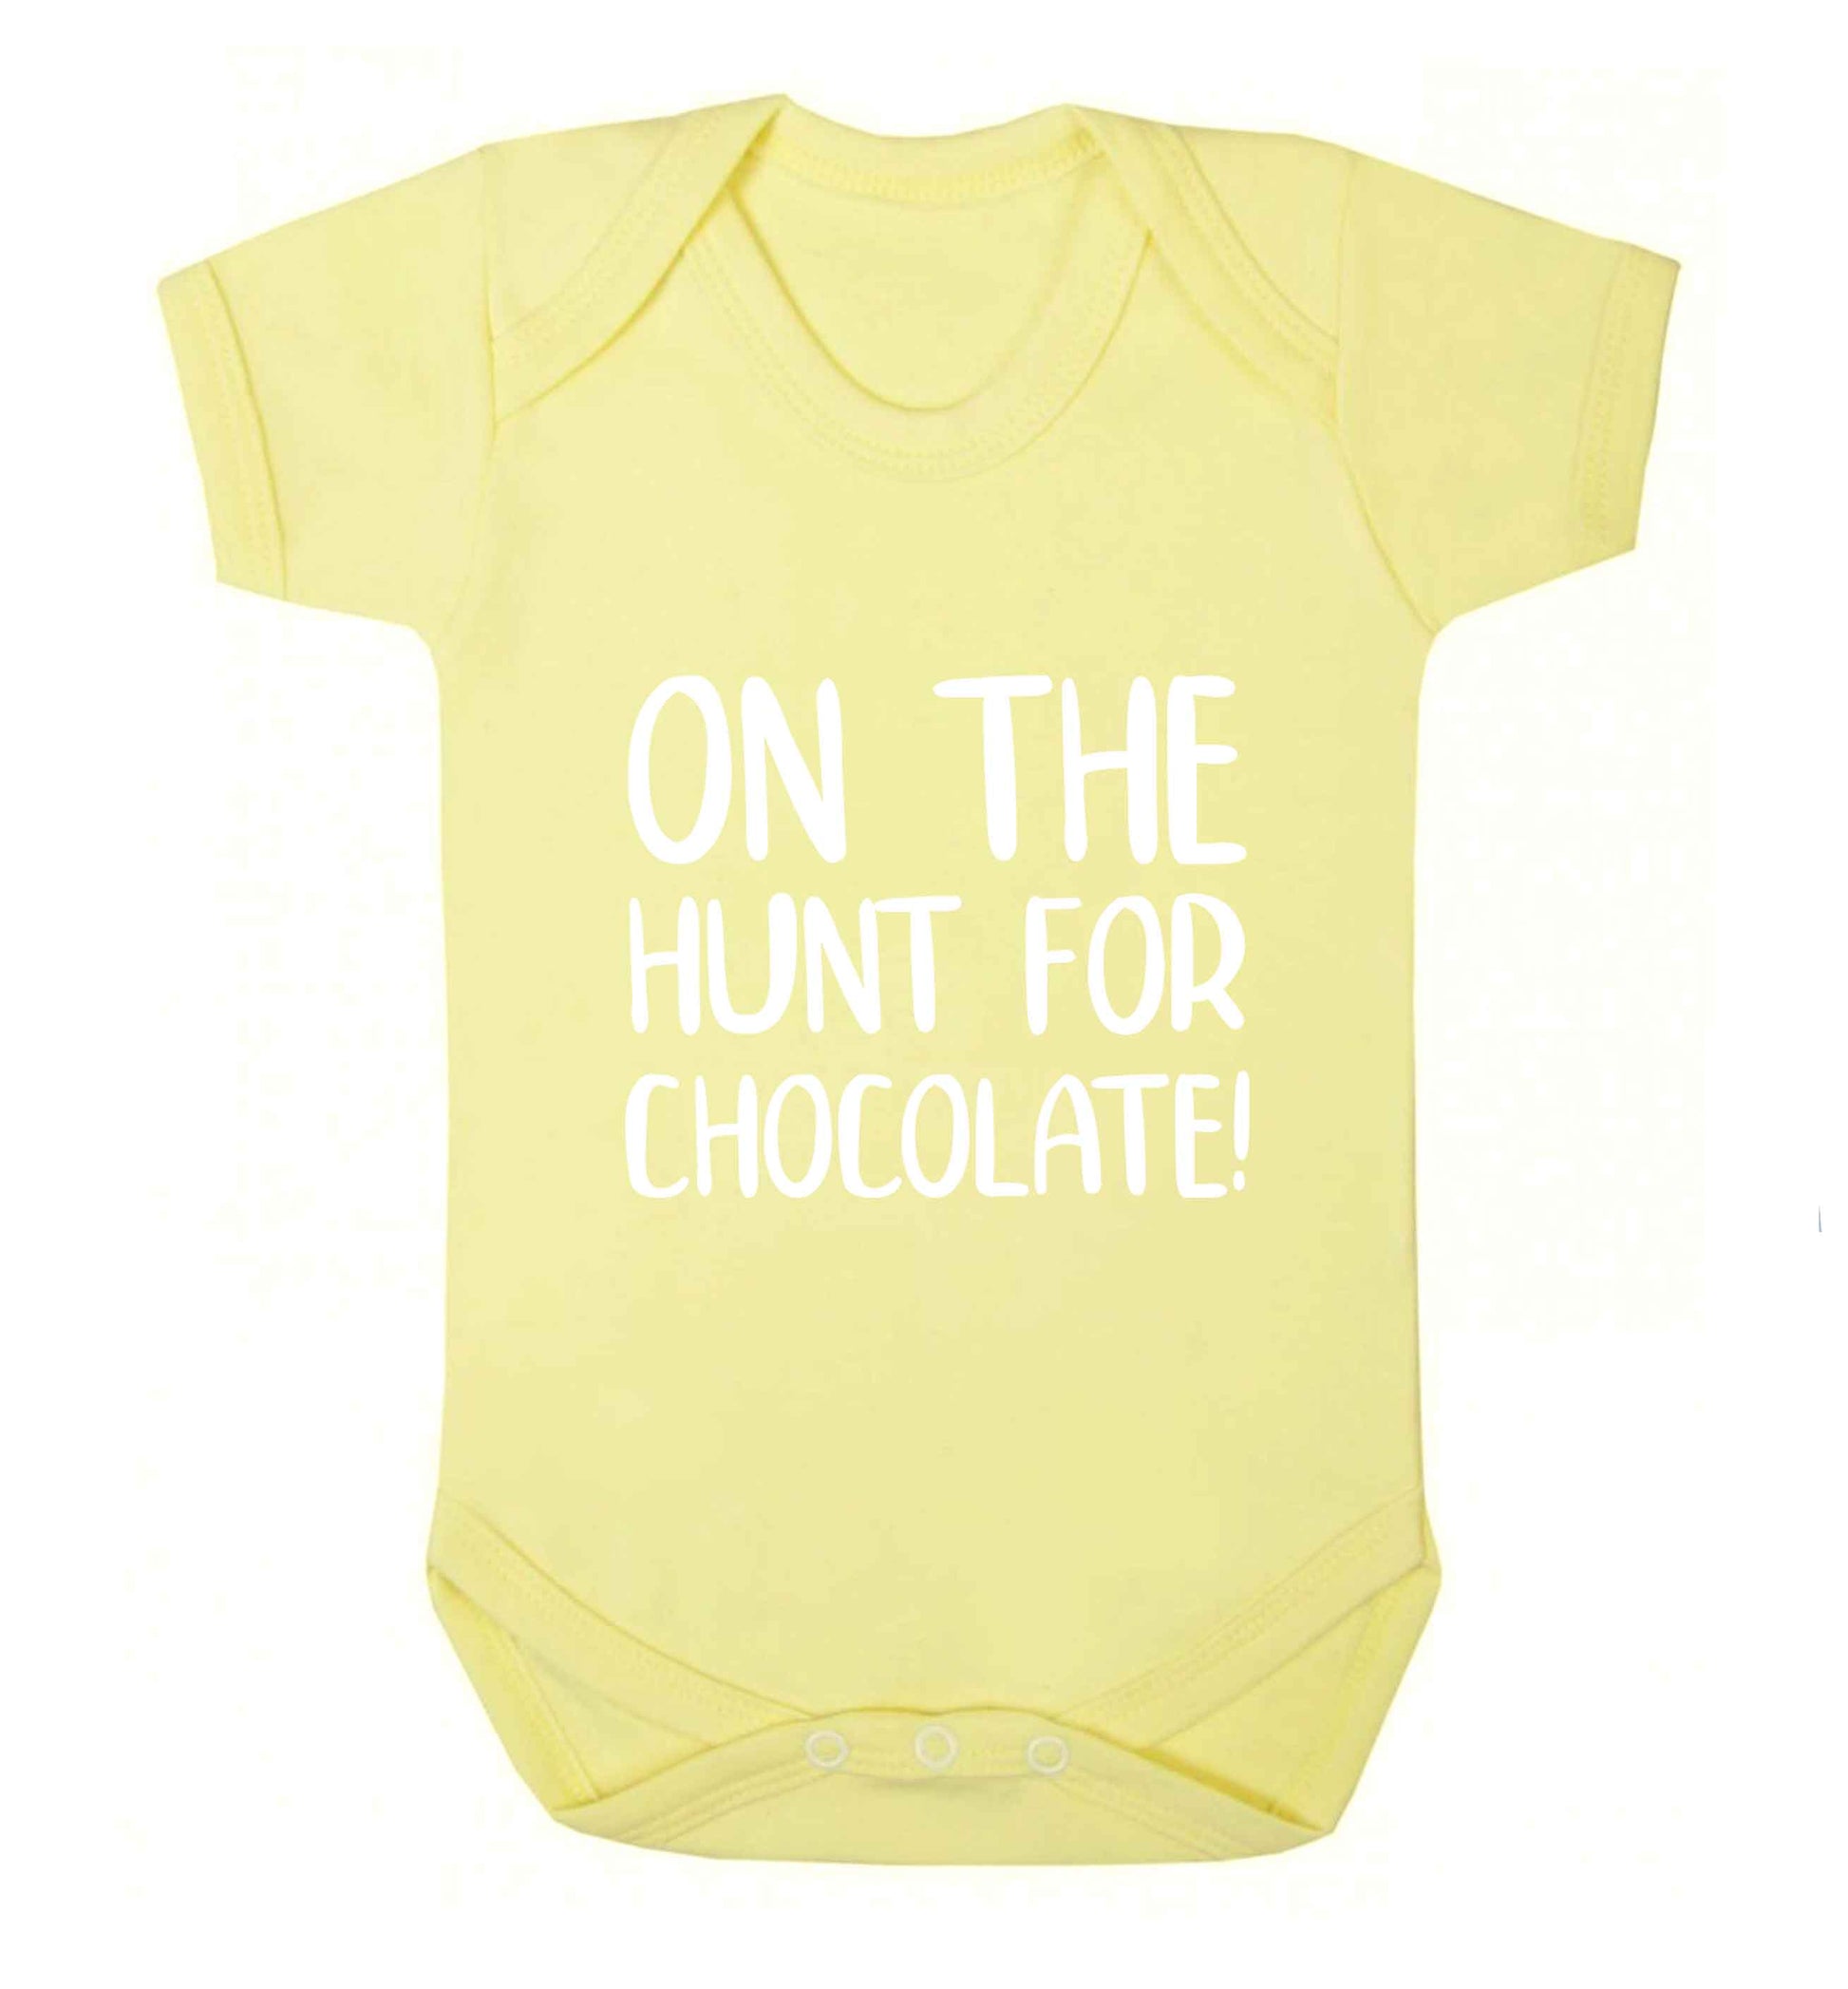 On the hunt for chocolate! baby vest pale yellow 18-24 months